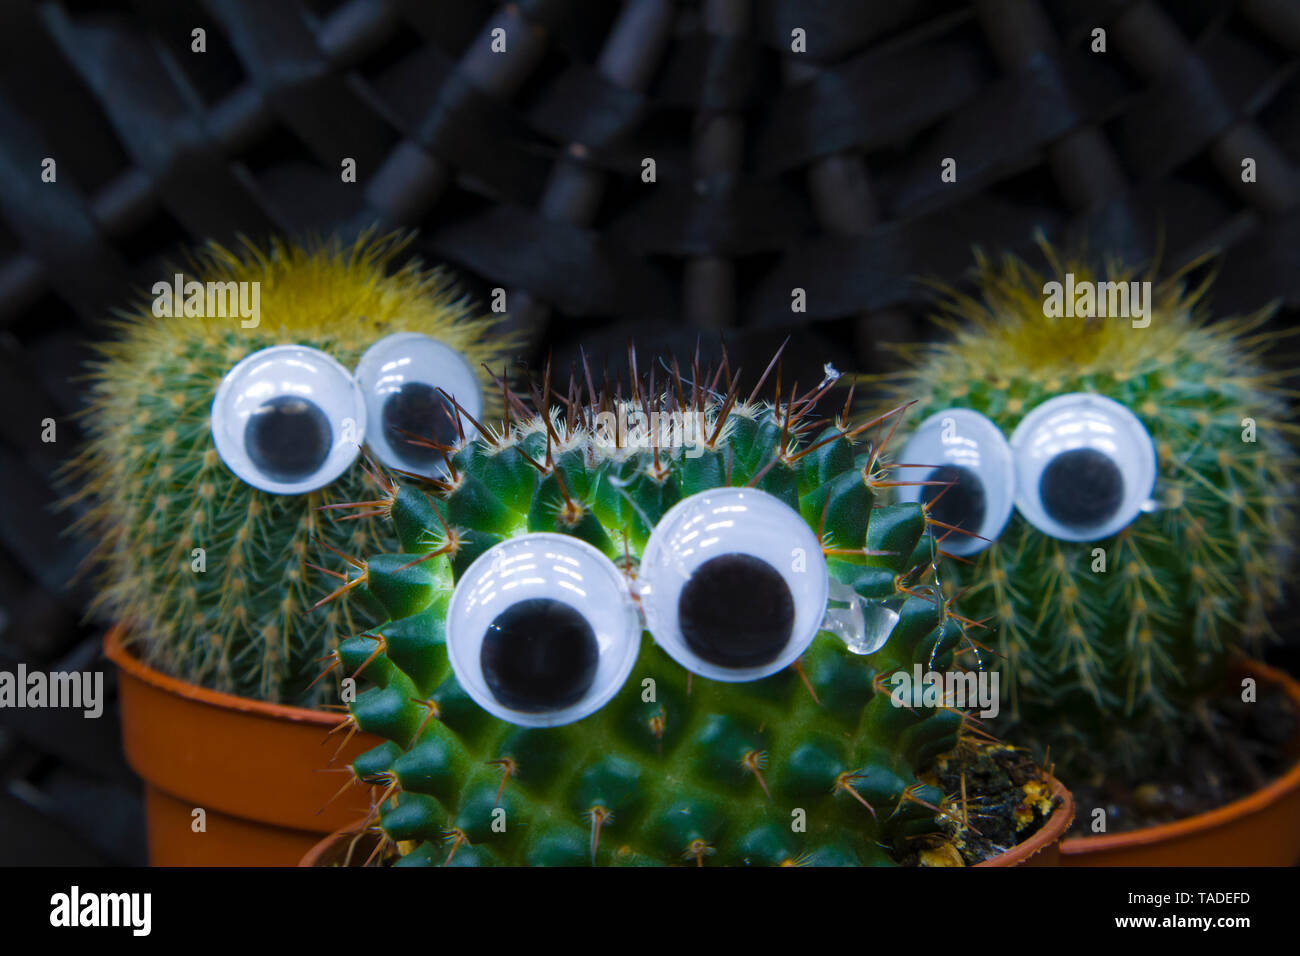 Funny cactus family, three little succulent cacti with plastic eyes growing in a pots Stock Photo